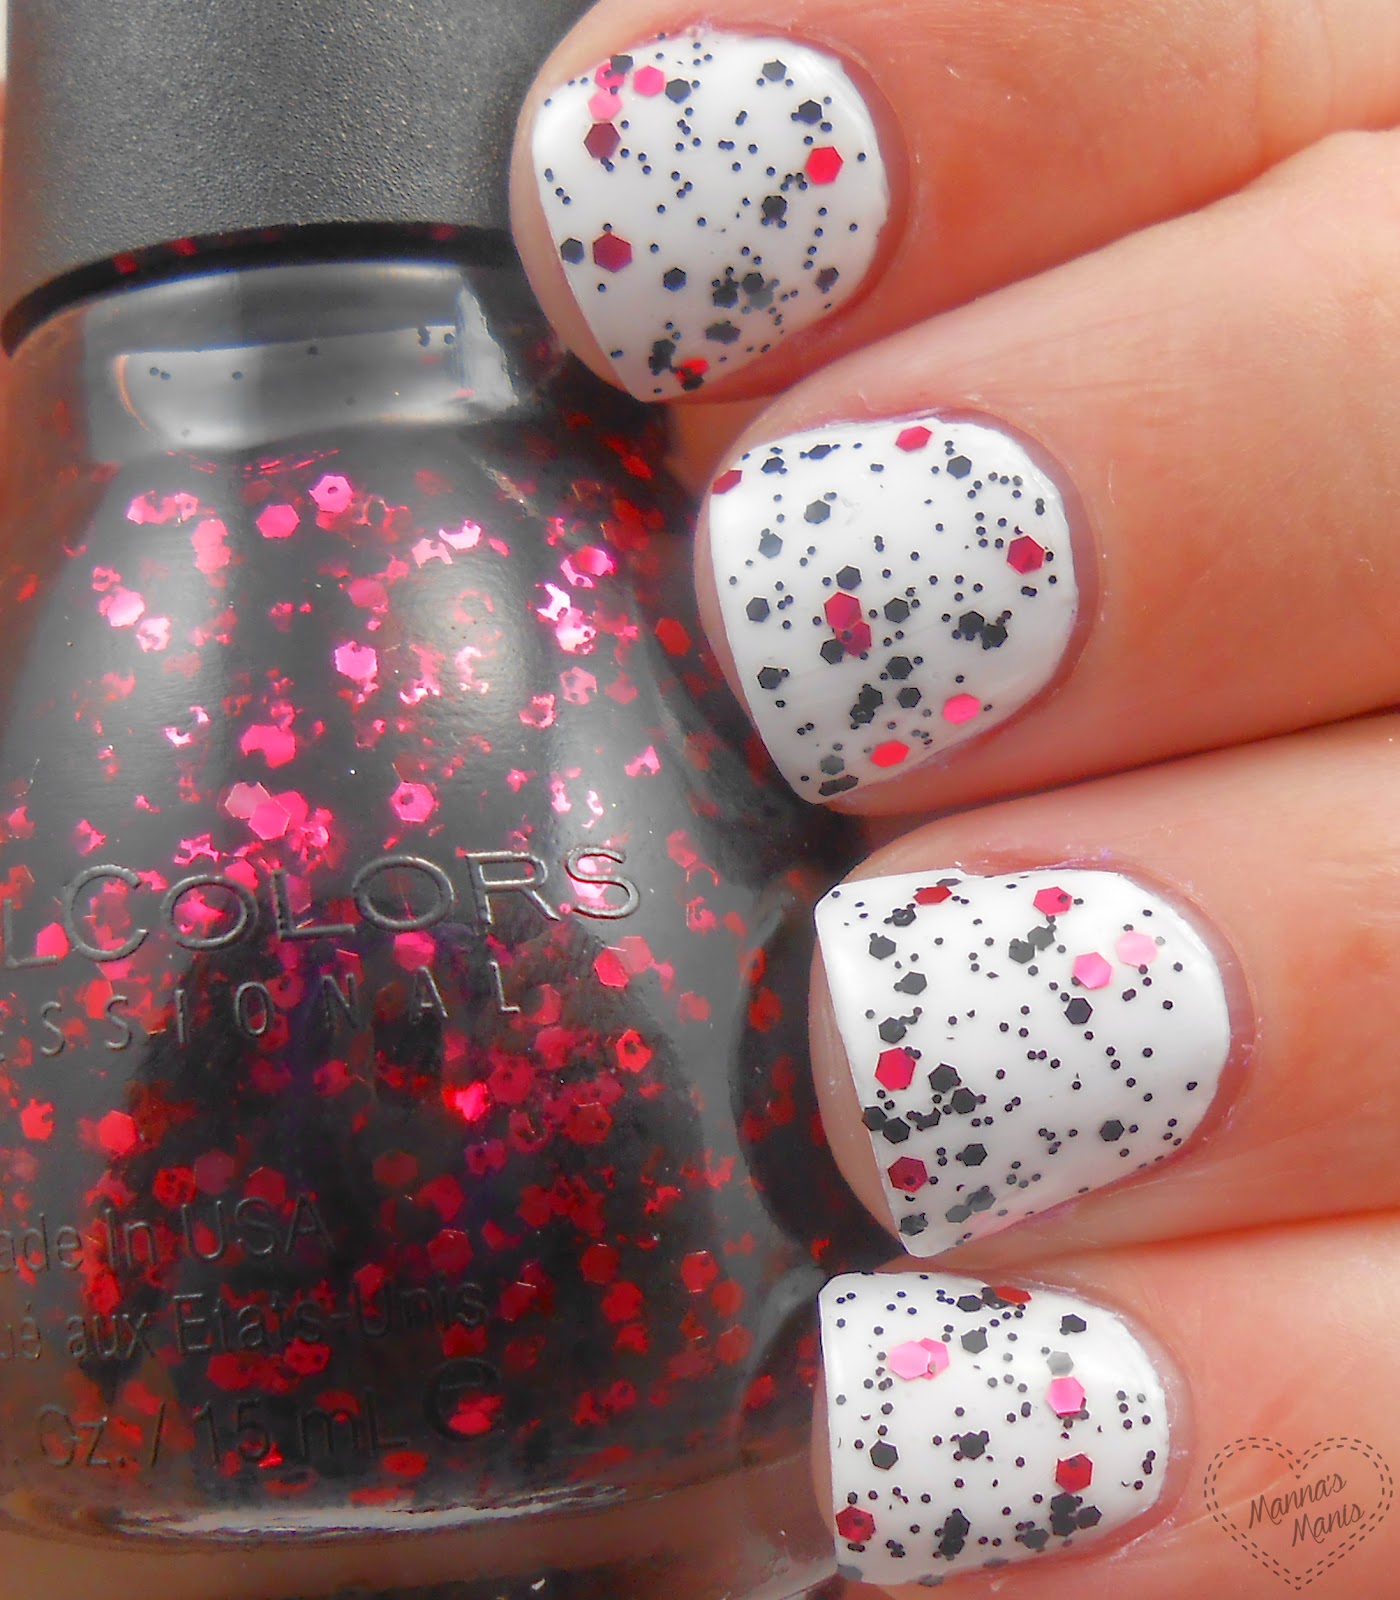 sinful colors upwrap me, a black and red glitter topper nail polish